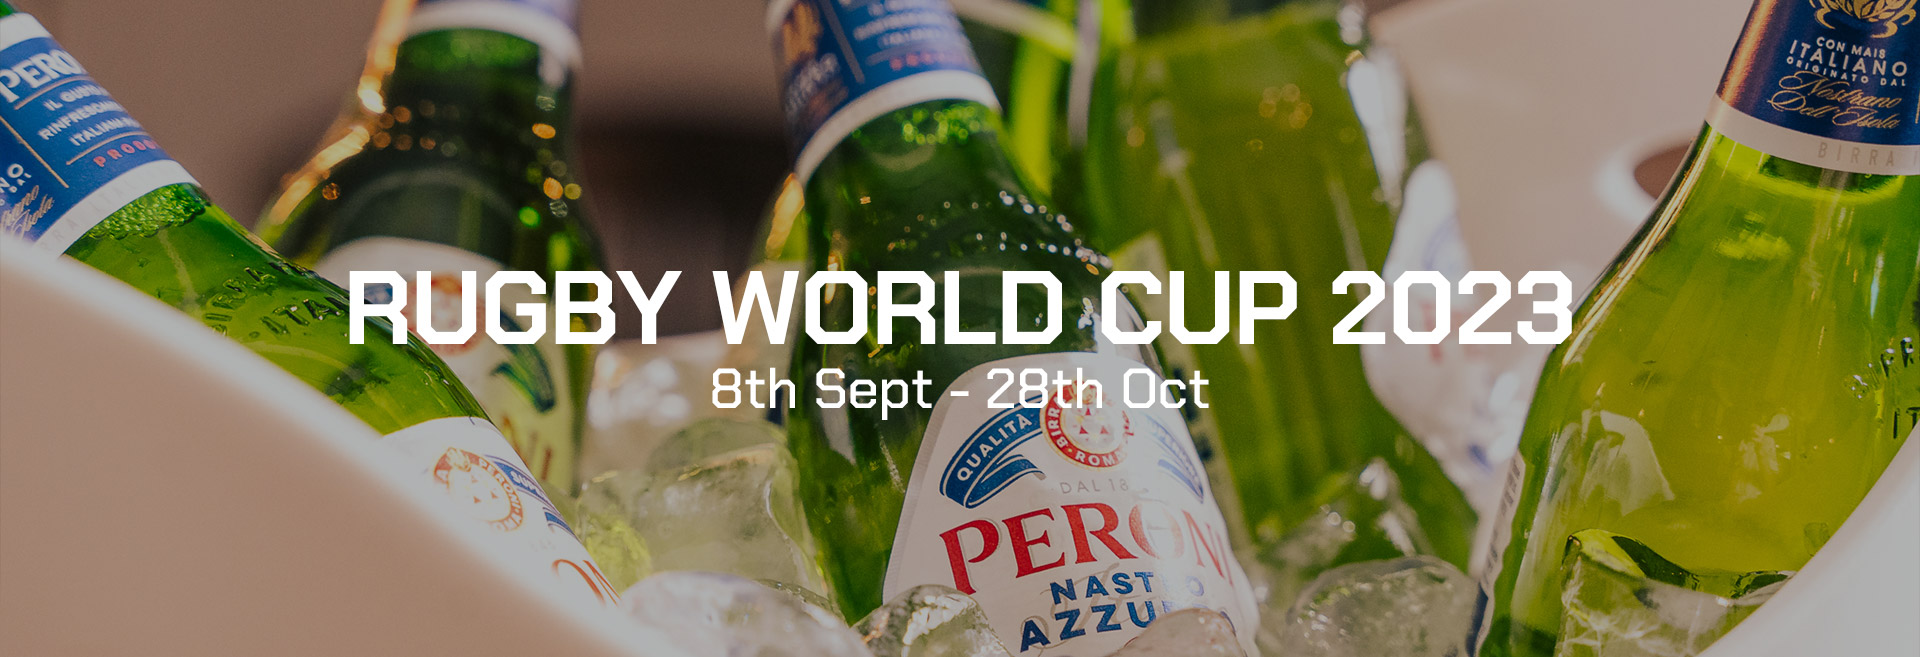 Watch the Rugby World Cup at The Lyttelton Arms